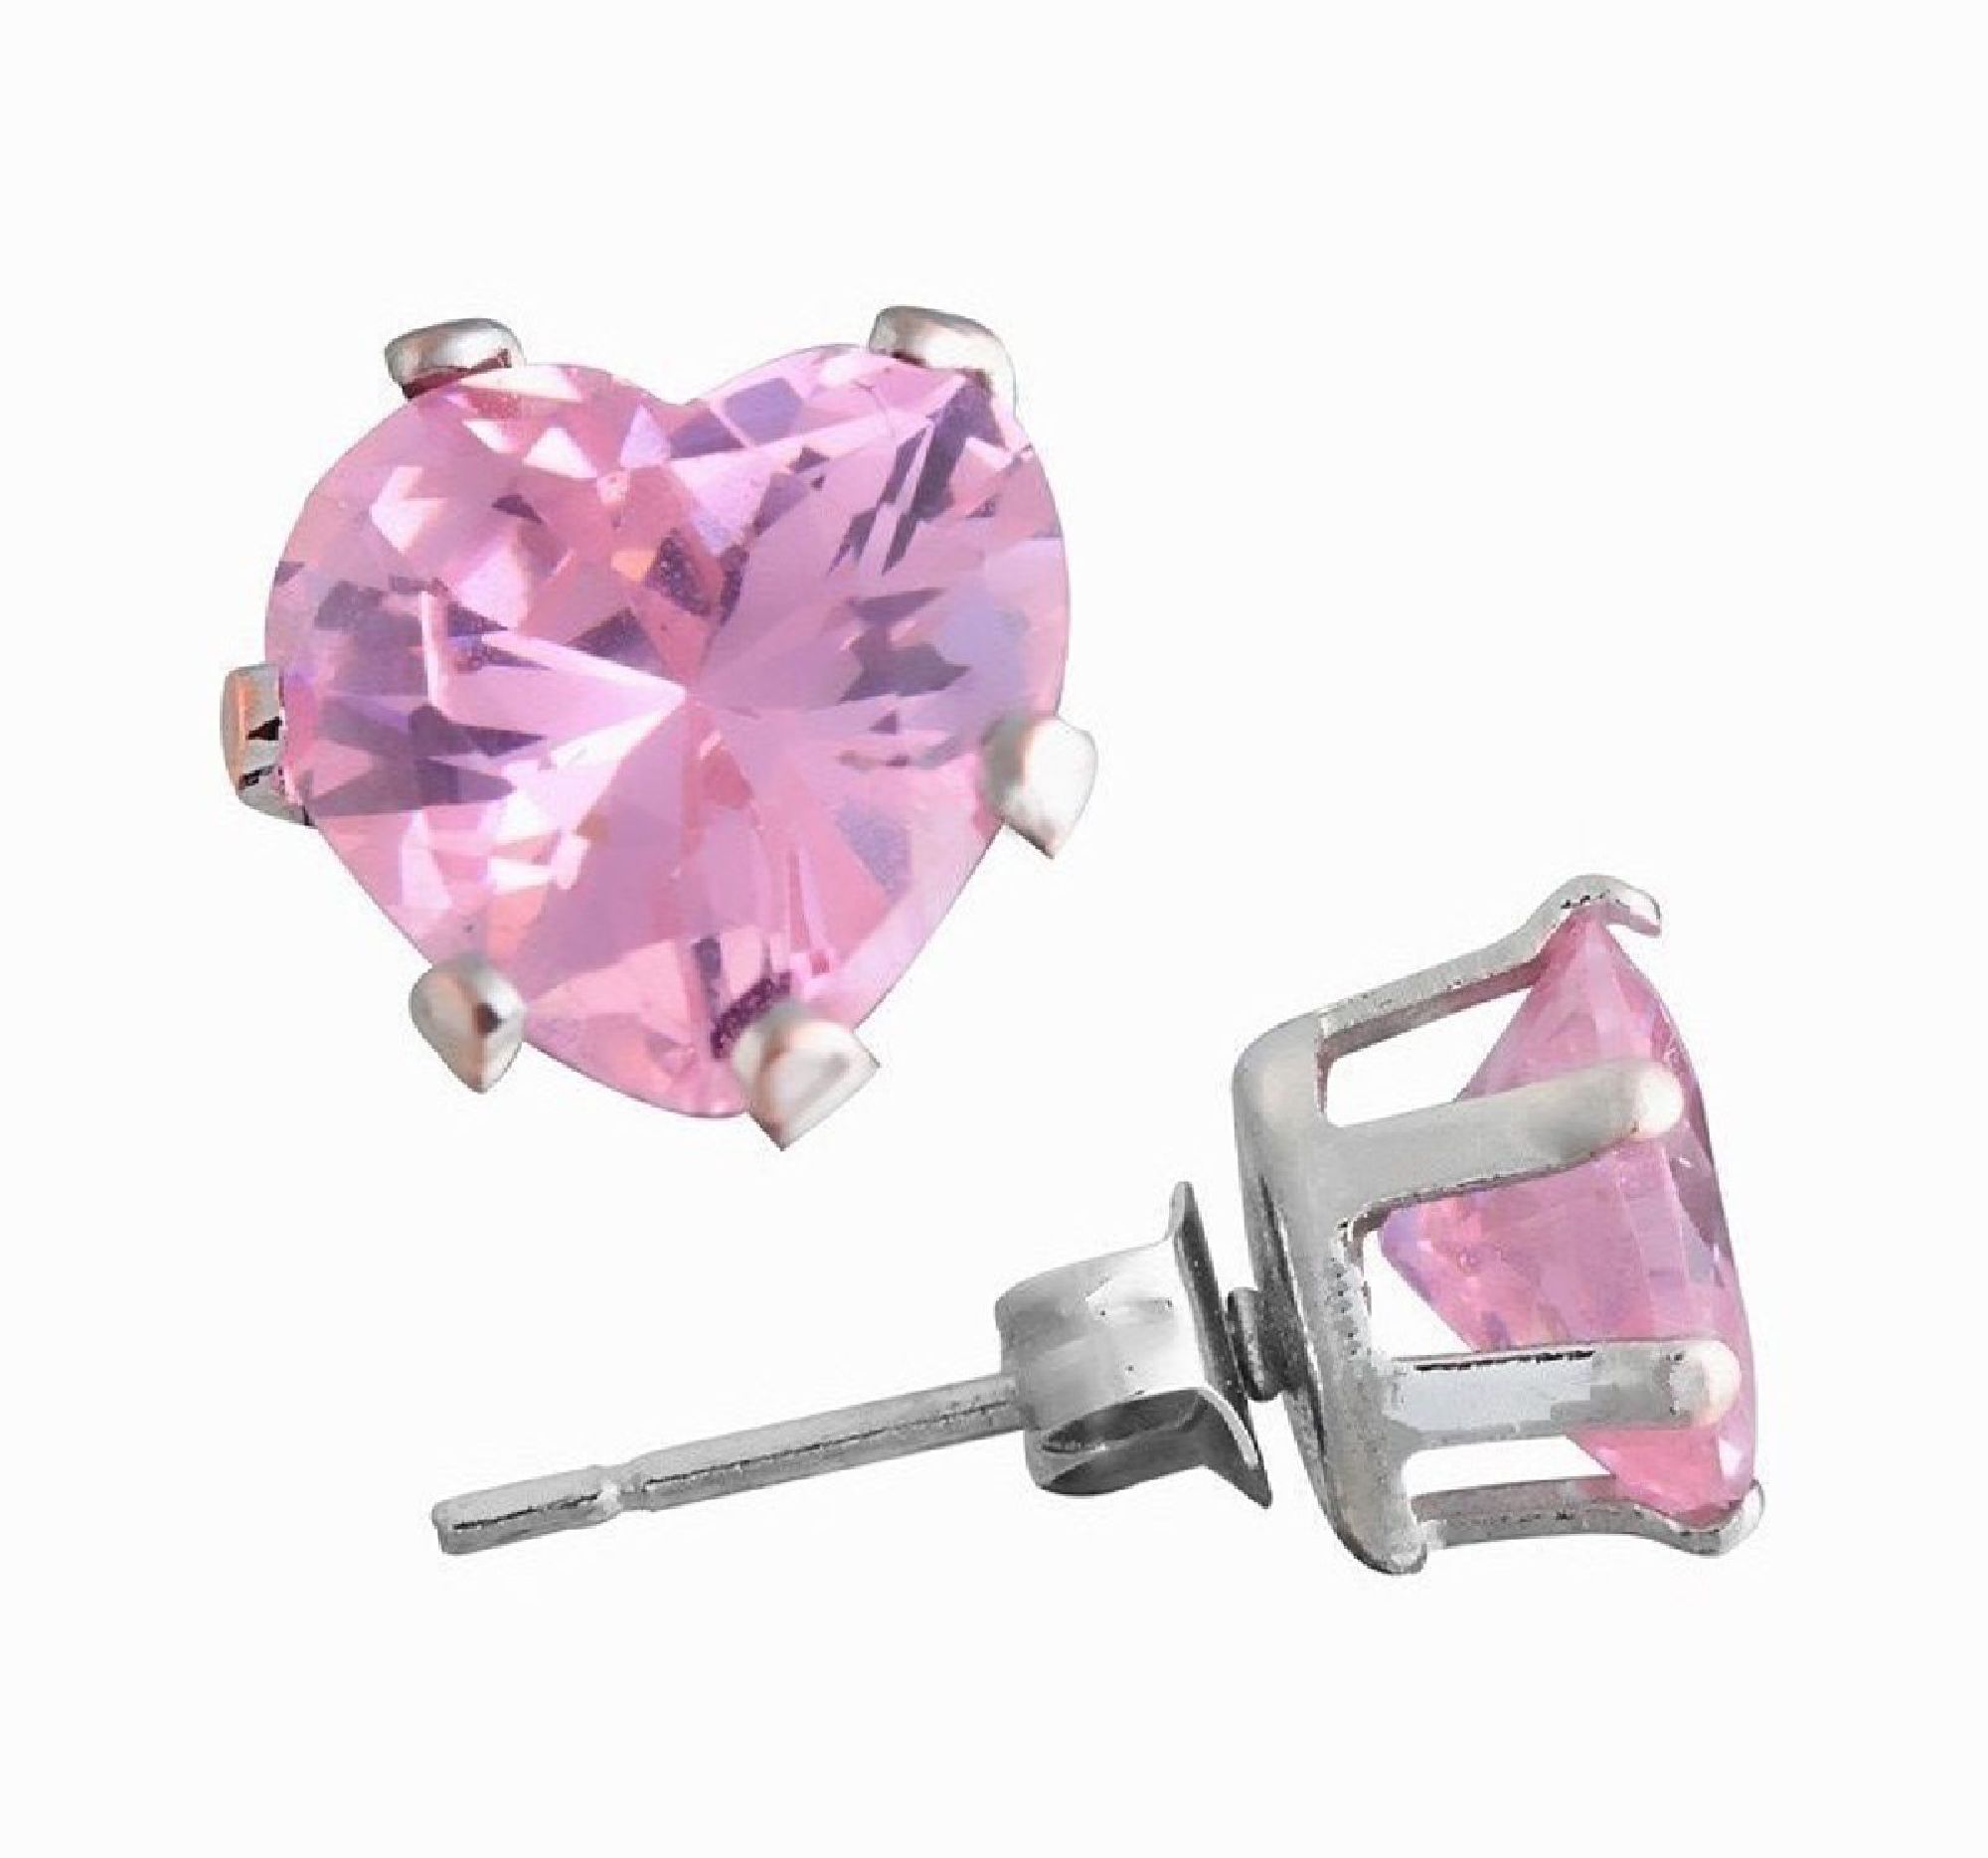 ParisJewelry.com 2 Carat Heart Shape Pink Diamond manmade Stud Earrings for Woman in 14k White Gold over Sterling Silver Designed in France